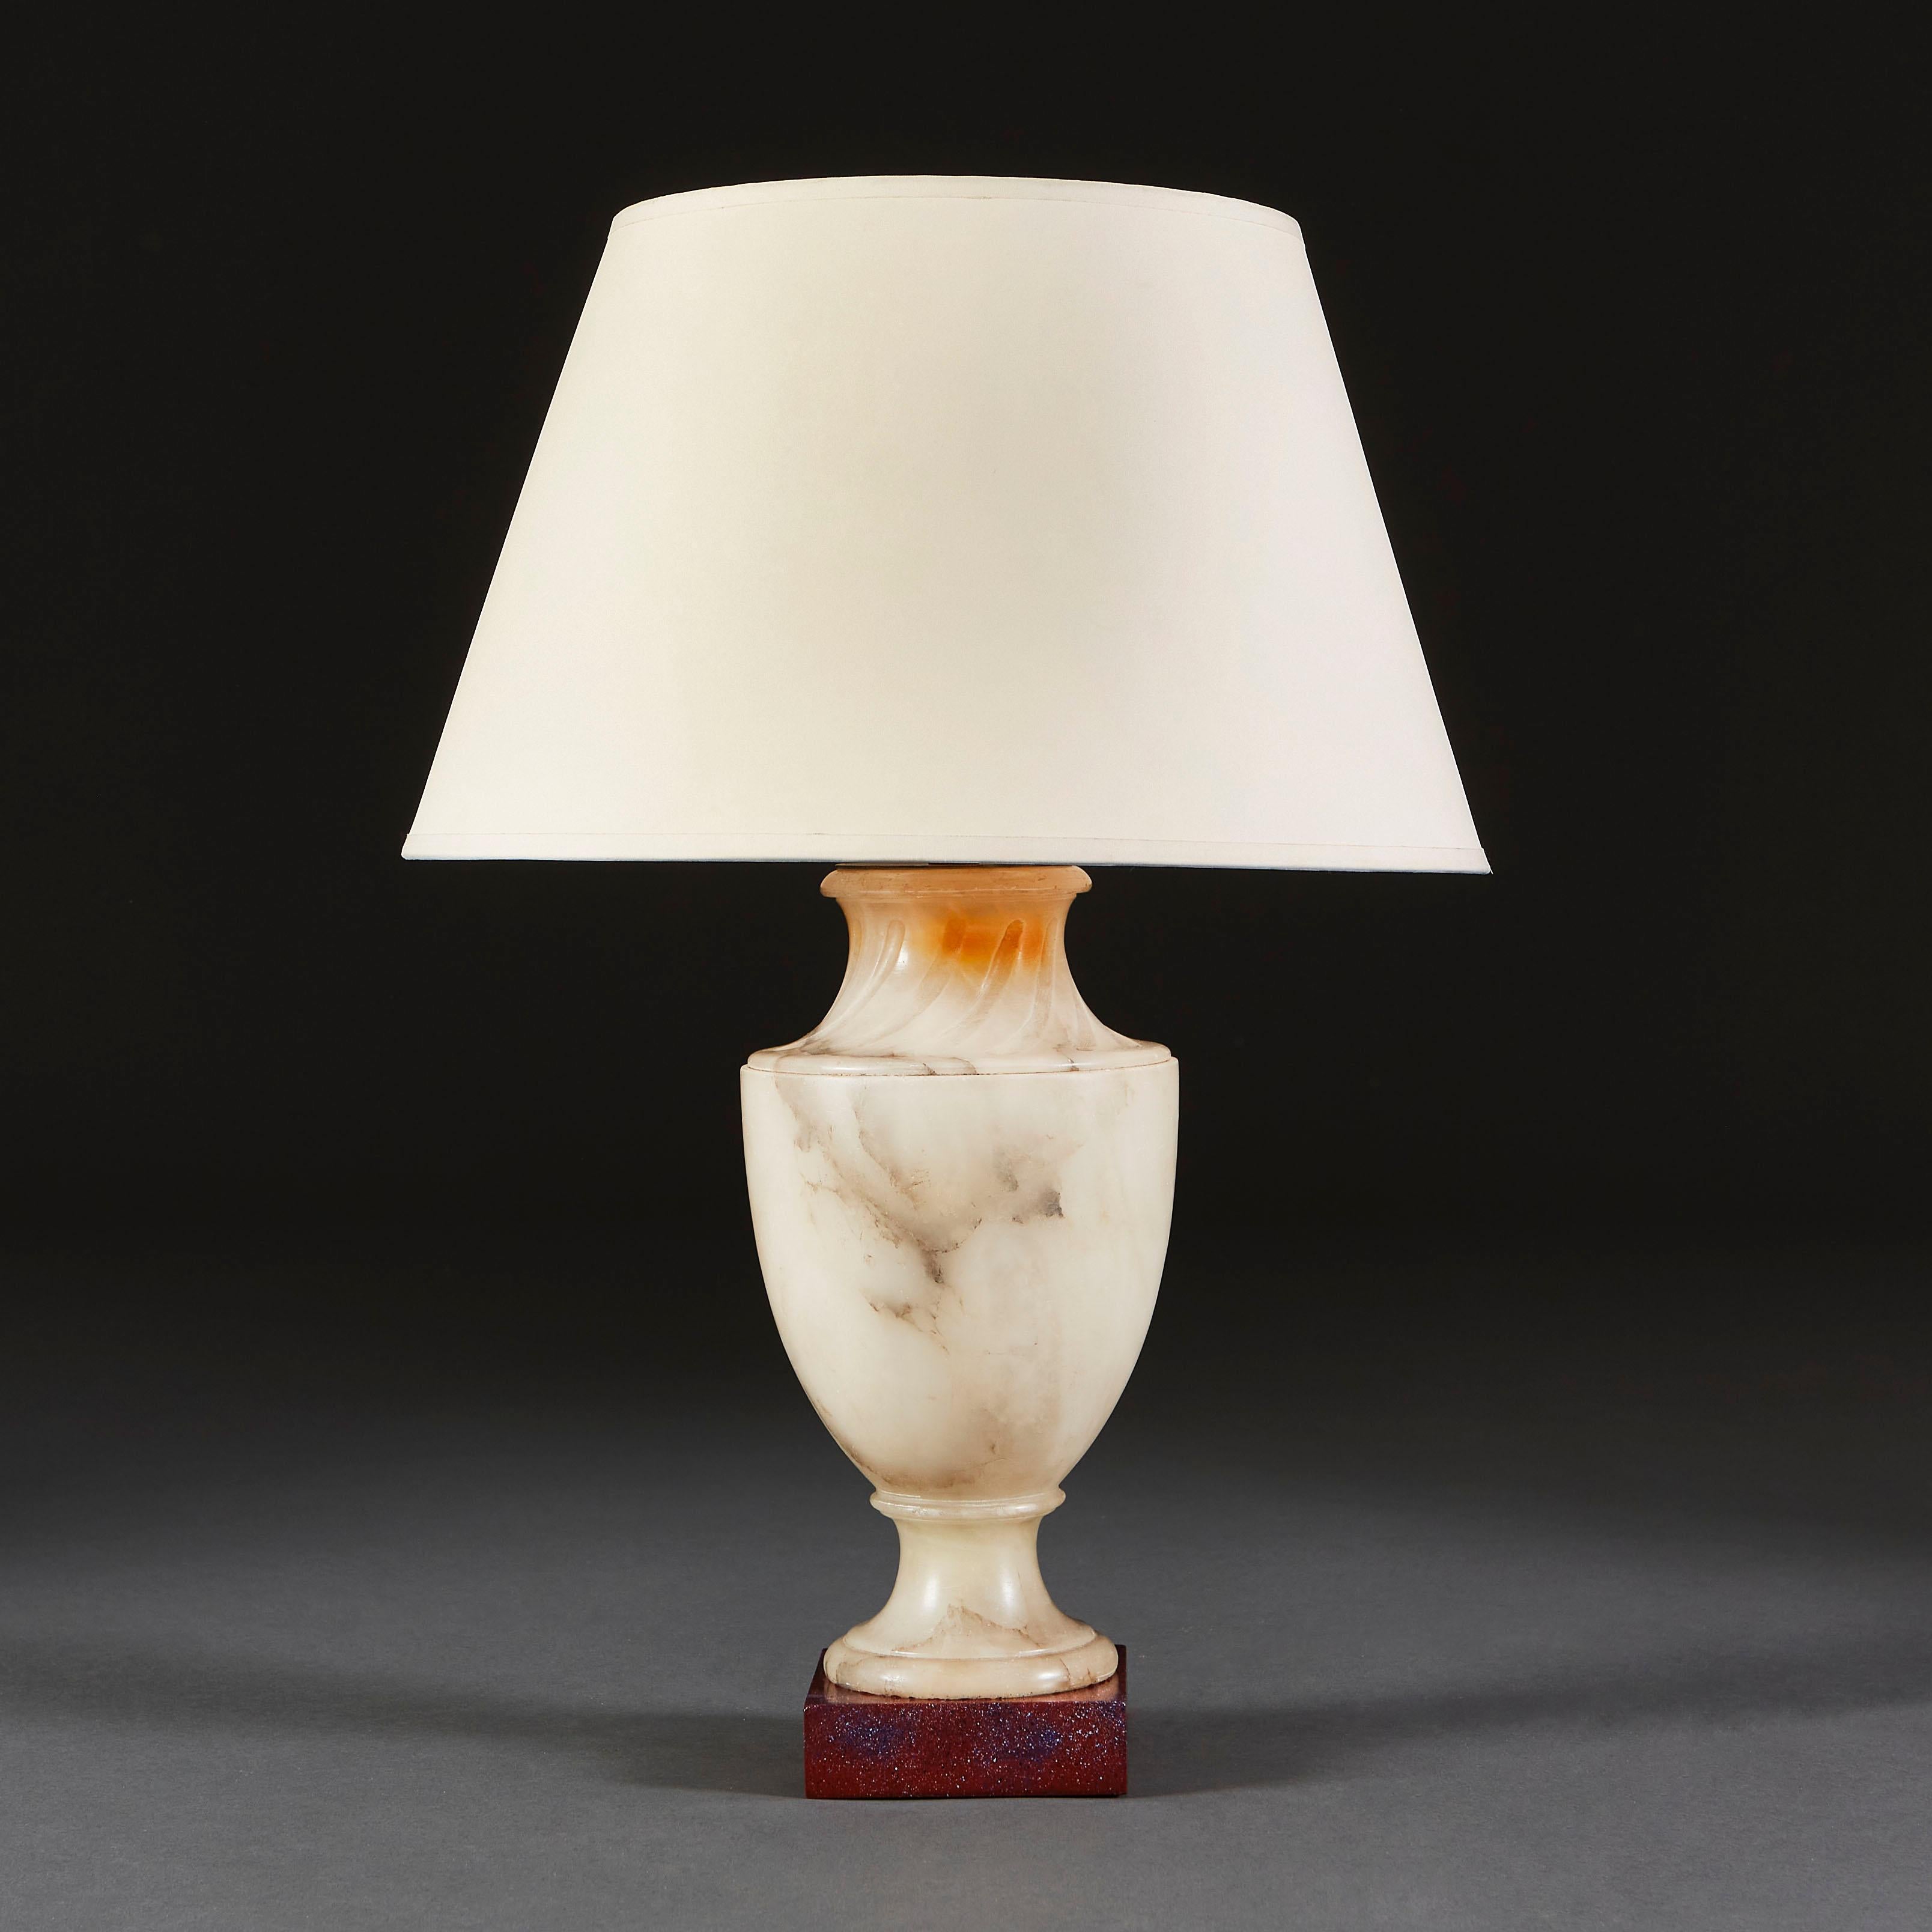 A late nineteenth century French alabaster lamp in the form of an urn, with fluting to the neck, set on a square, ebonised plinth.

Currently wired for the UK. 

Please note: lampshade not included.